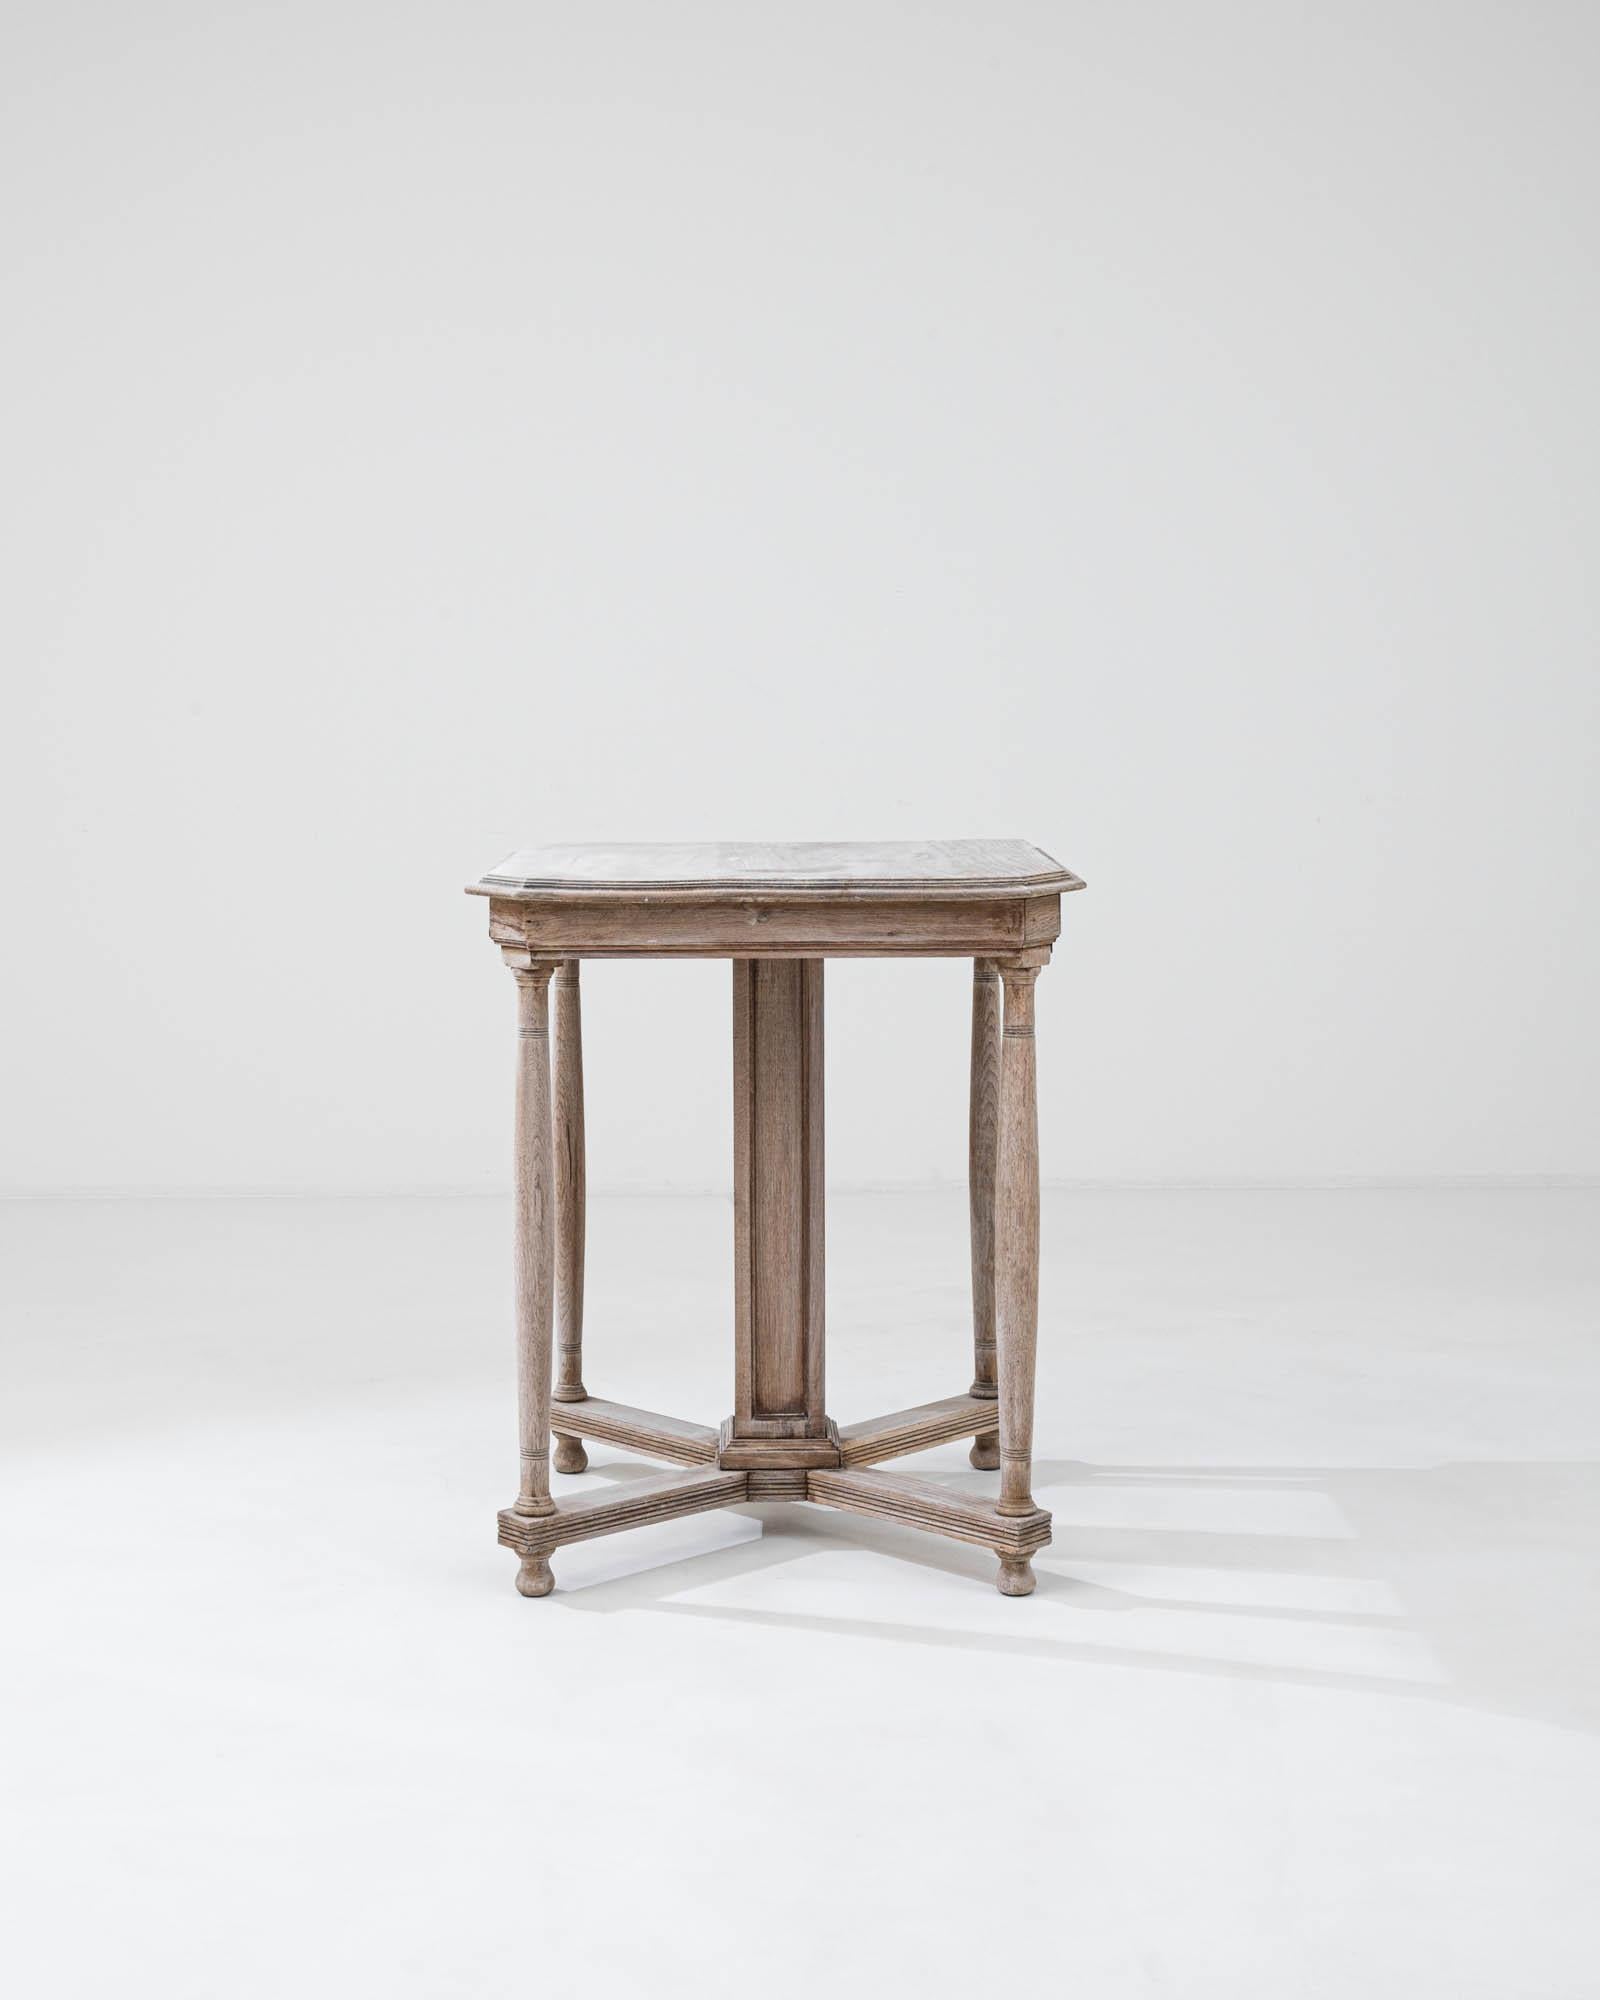 Step back in time with this exquisite early 20th-century Belgian side table, a testament to timeless craftsmanship. Constructed from robust bleached oak, its weathered texture and soft, whitewashed tone highlight the natural beauty and grain of the